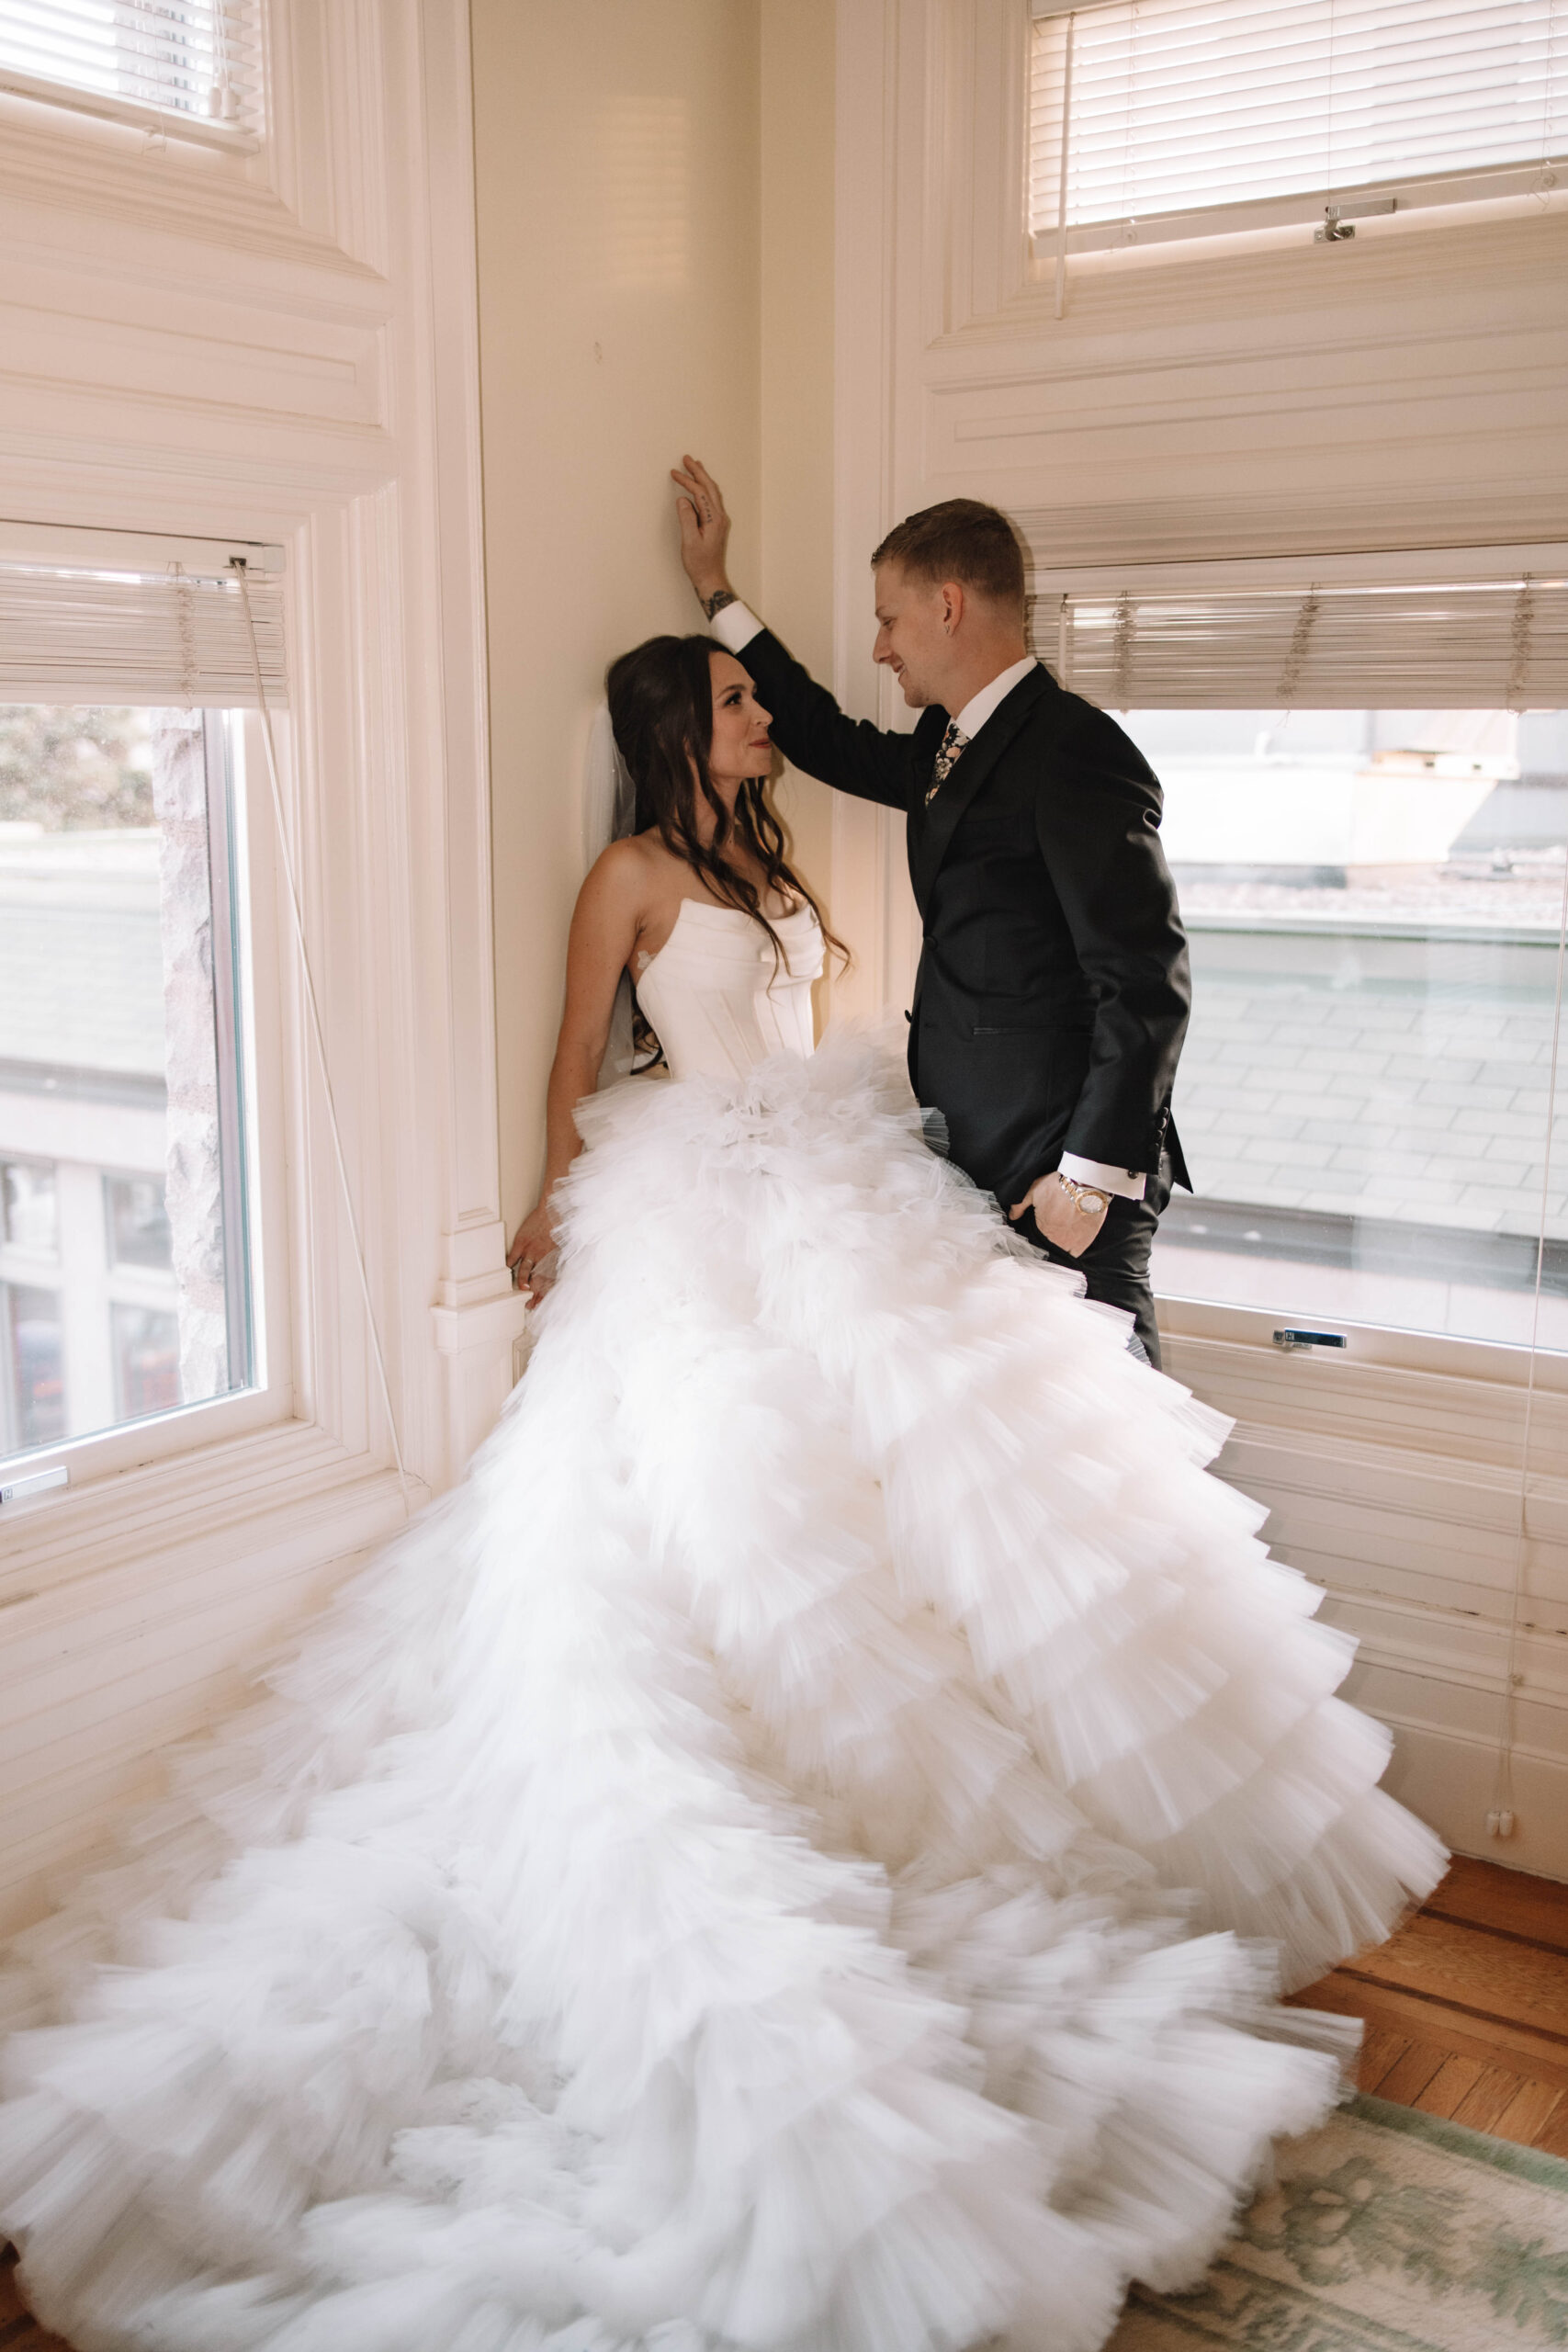 A bride in a voluminous white gown leans against the wall as her husband leans in for a kiss. Her dress from a wedding dress shop in Minneapolis 